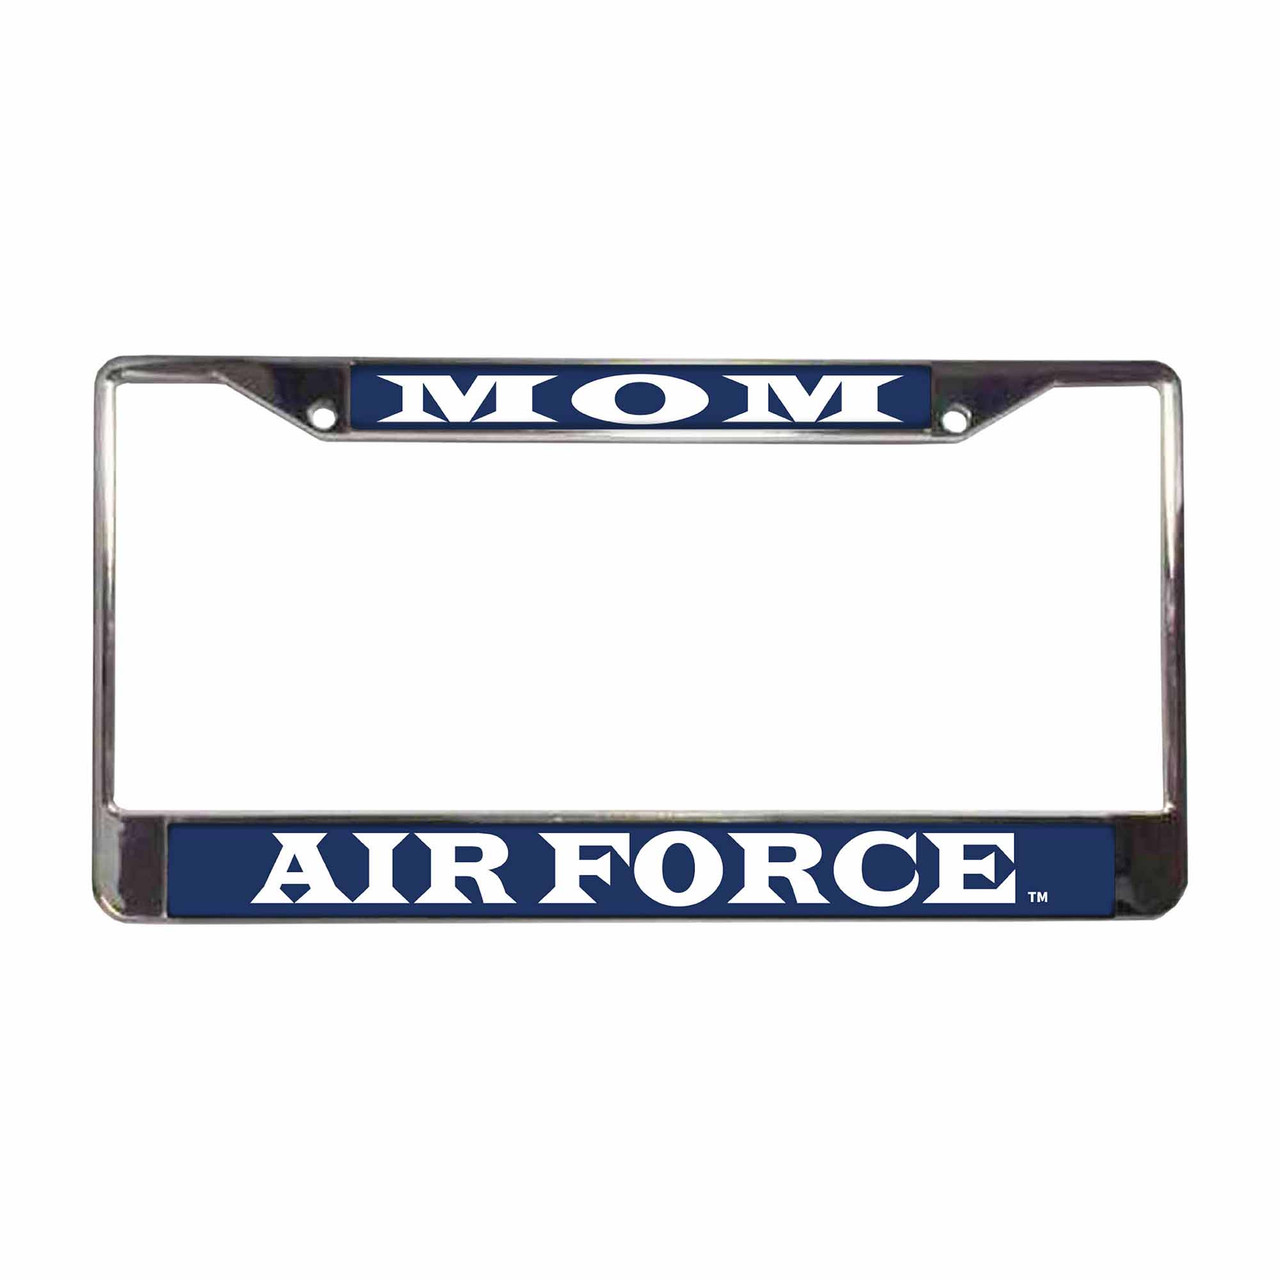 air force mom license plate frame - front view